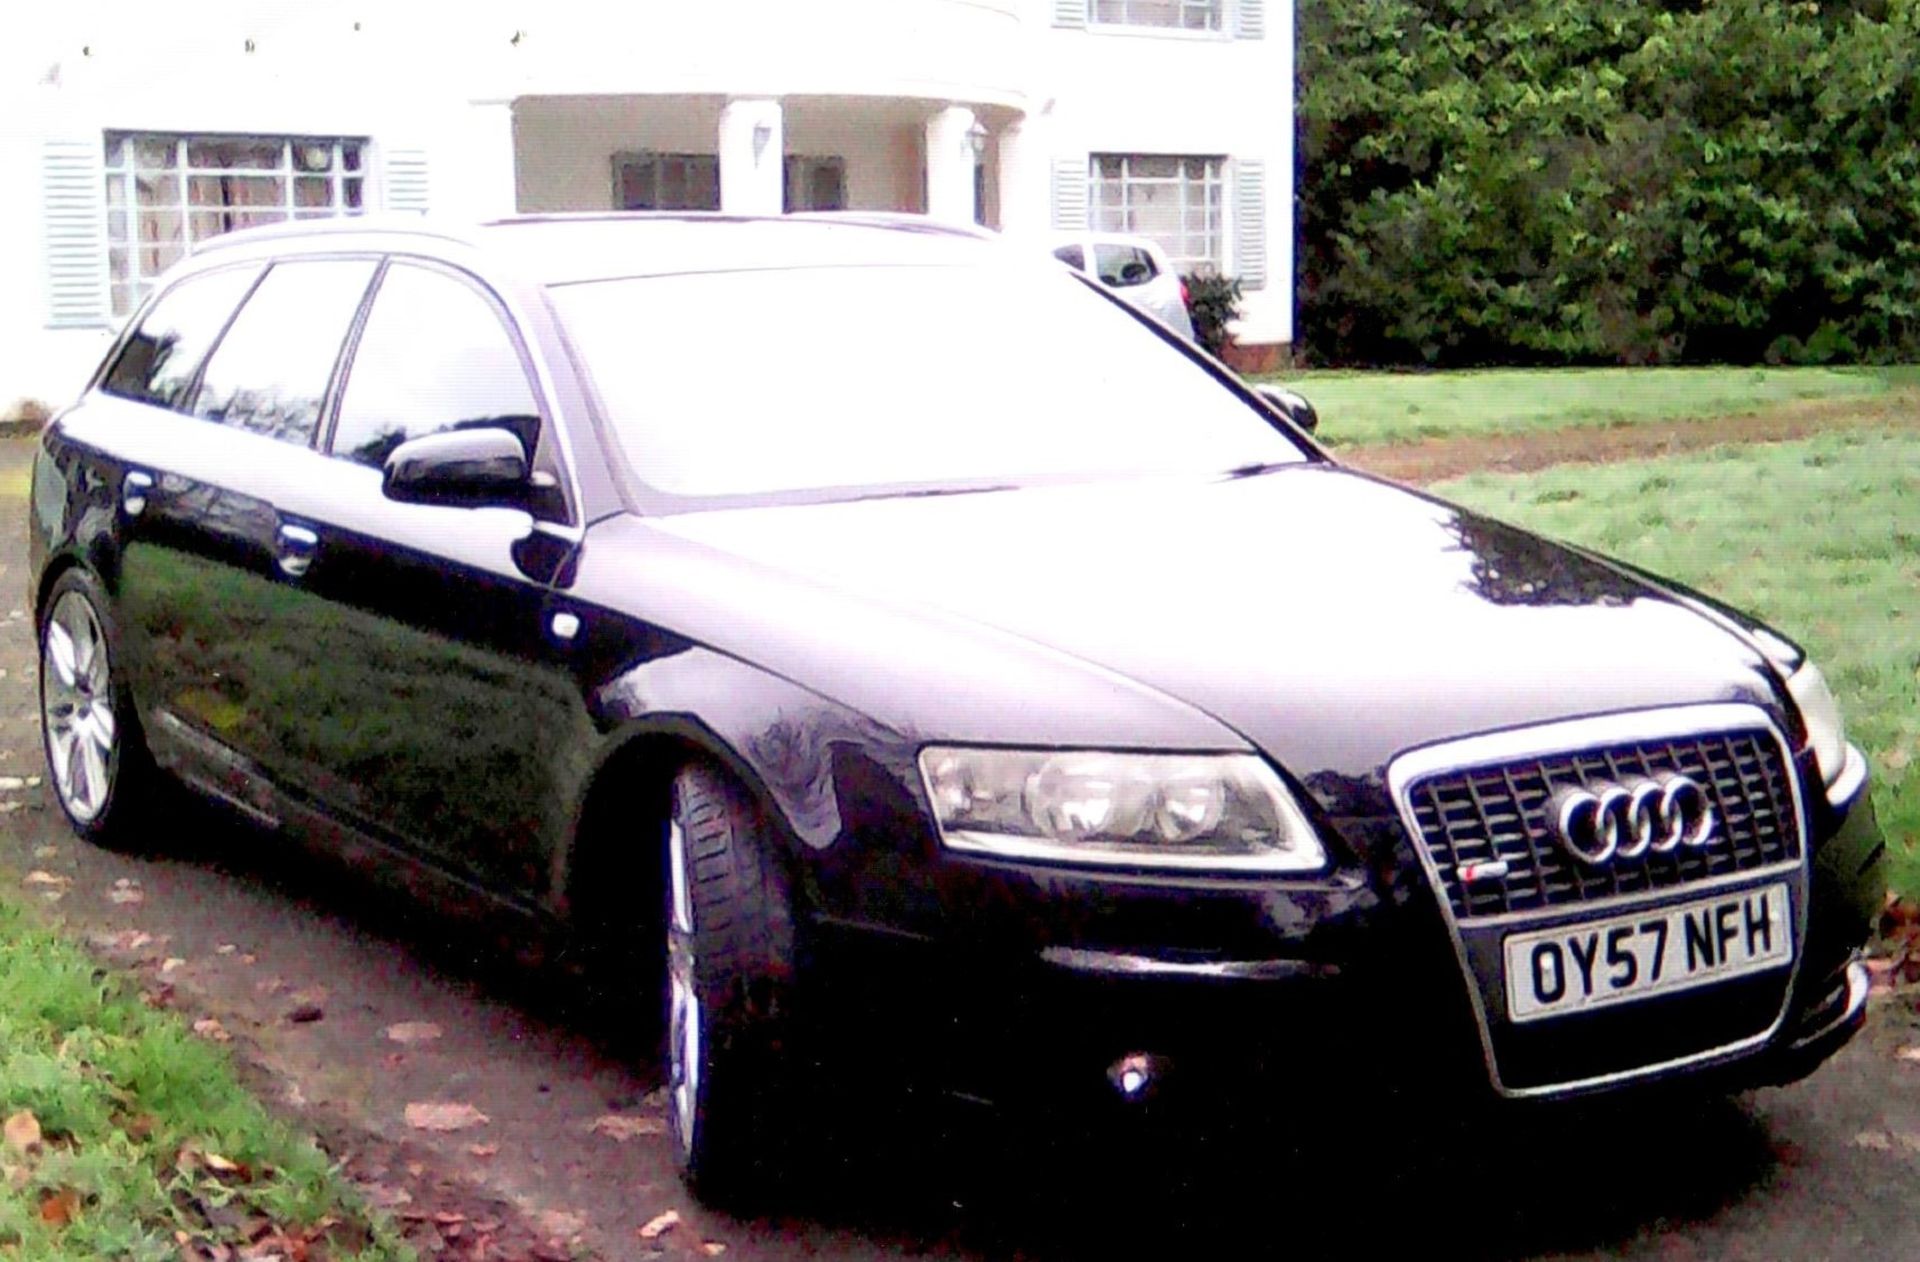 2007 Audi A6 Avant 2.7 TDi Registration number OY57 NFH Chassis number WAUZZZ4F58N016755 Engine - Image 9 of 17